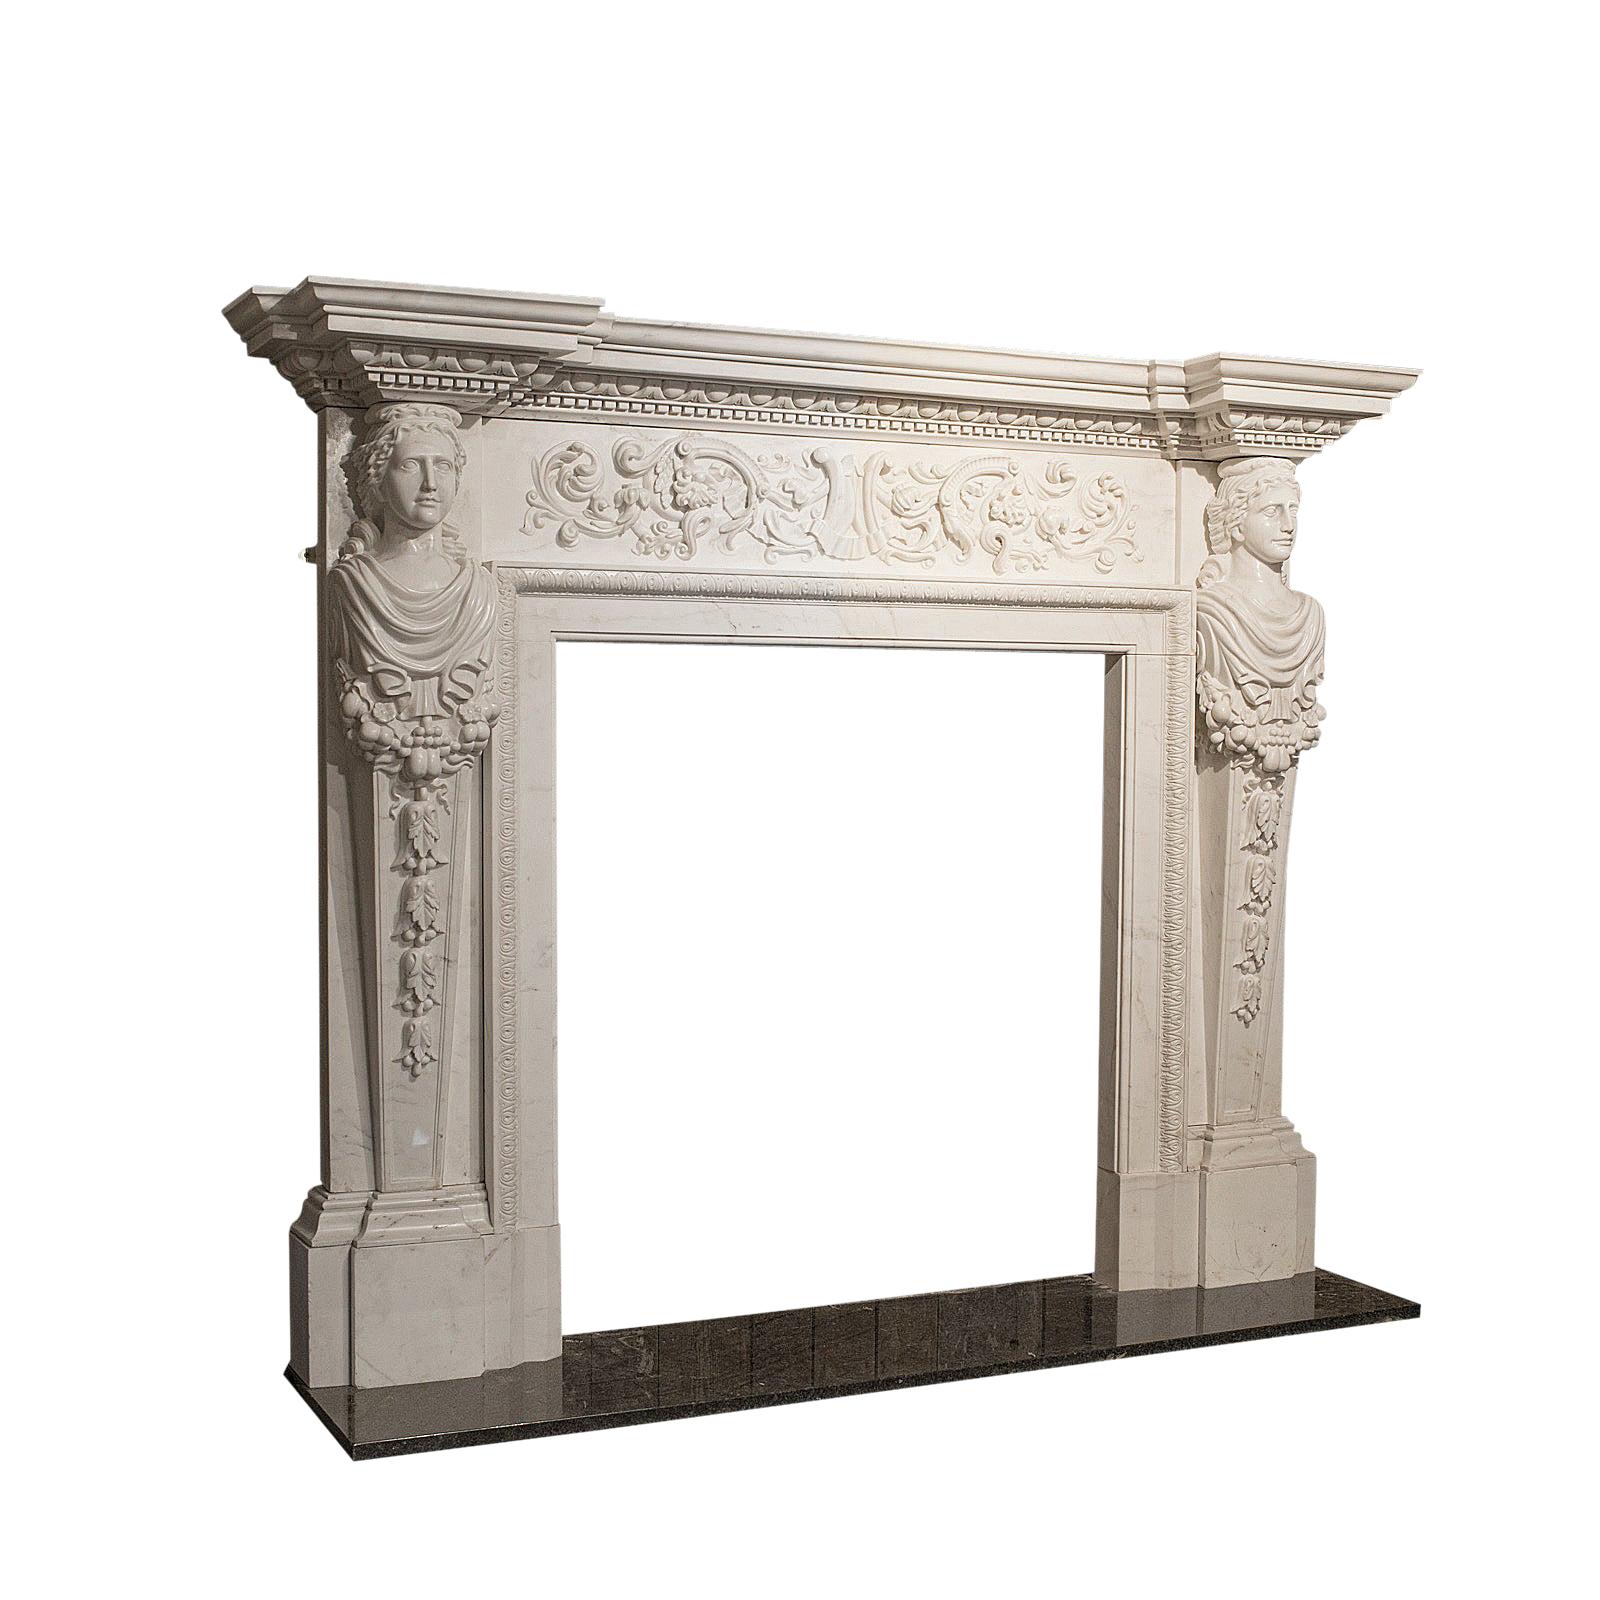 Large Monumental Fireplace, English, Marble, Fire Surround, Neoclassical Taste For Sale